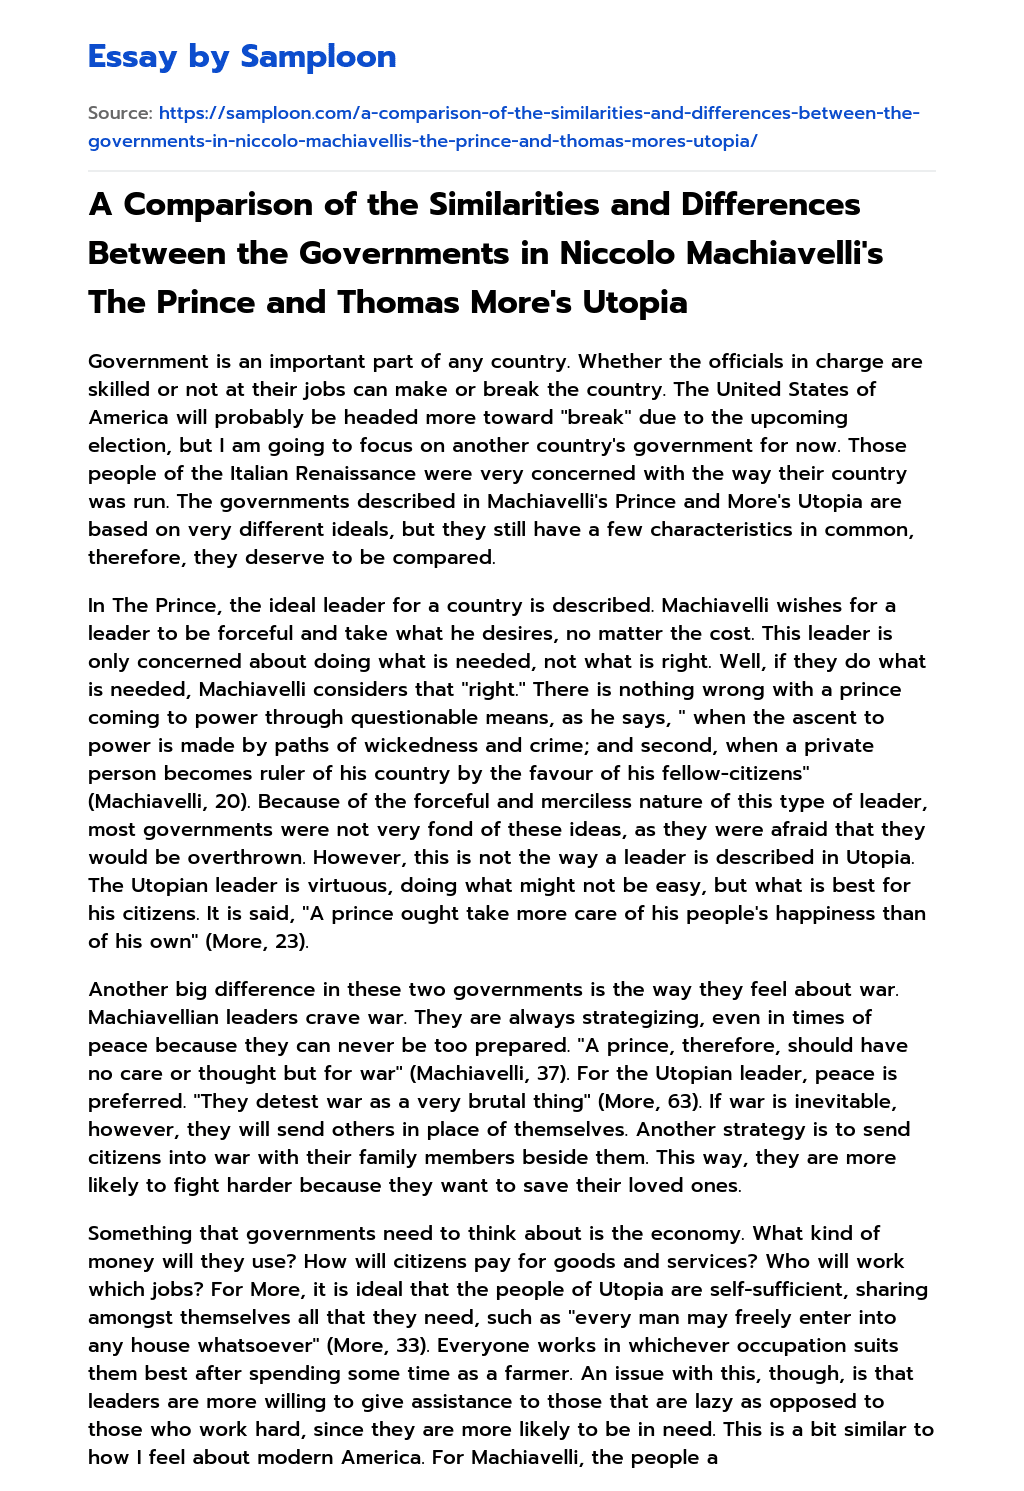 A Comparison of the Similarities and Differences Between the Governments in Niccolo Machiavelli’s The Prince and Thomas More’s Utopia essay